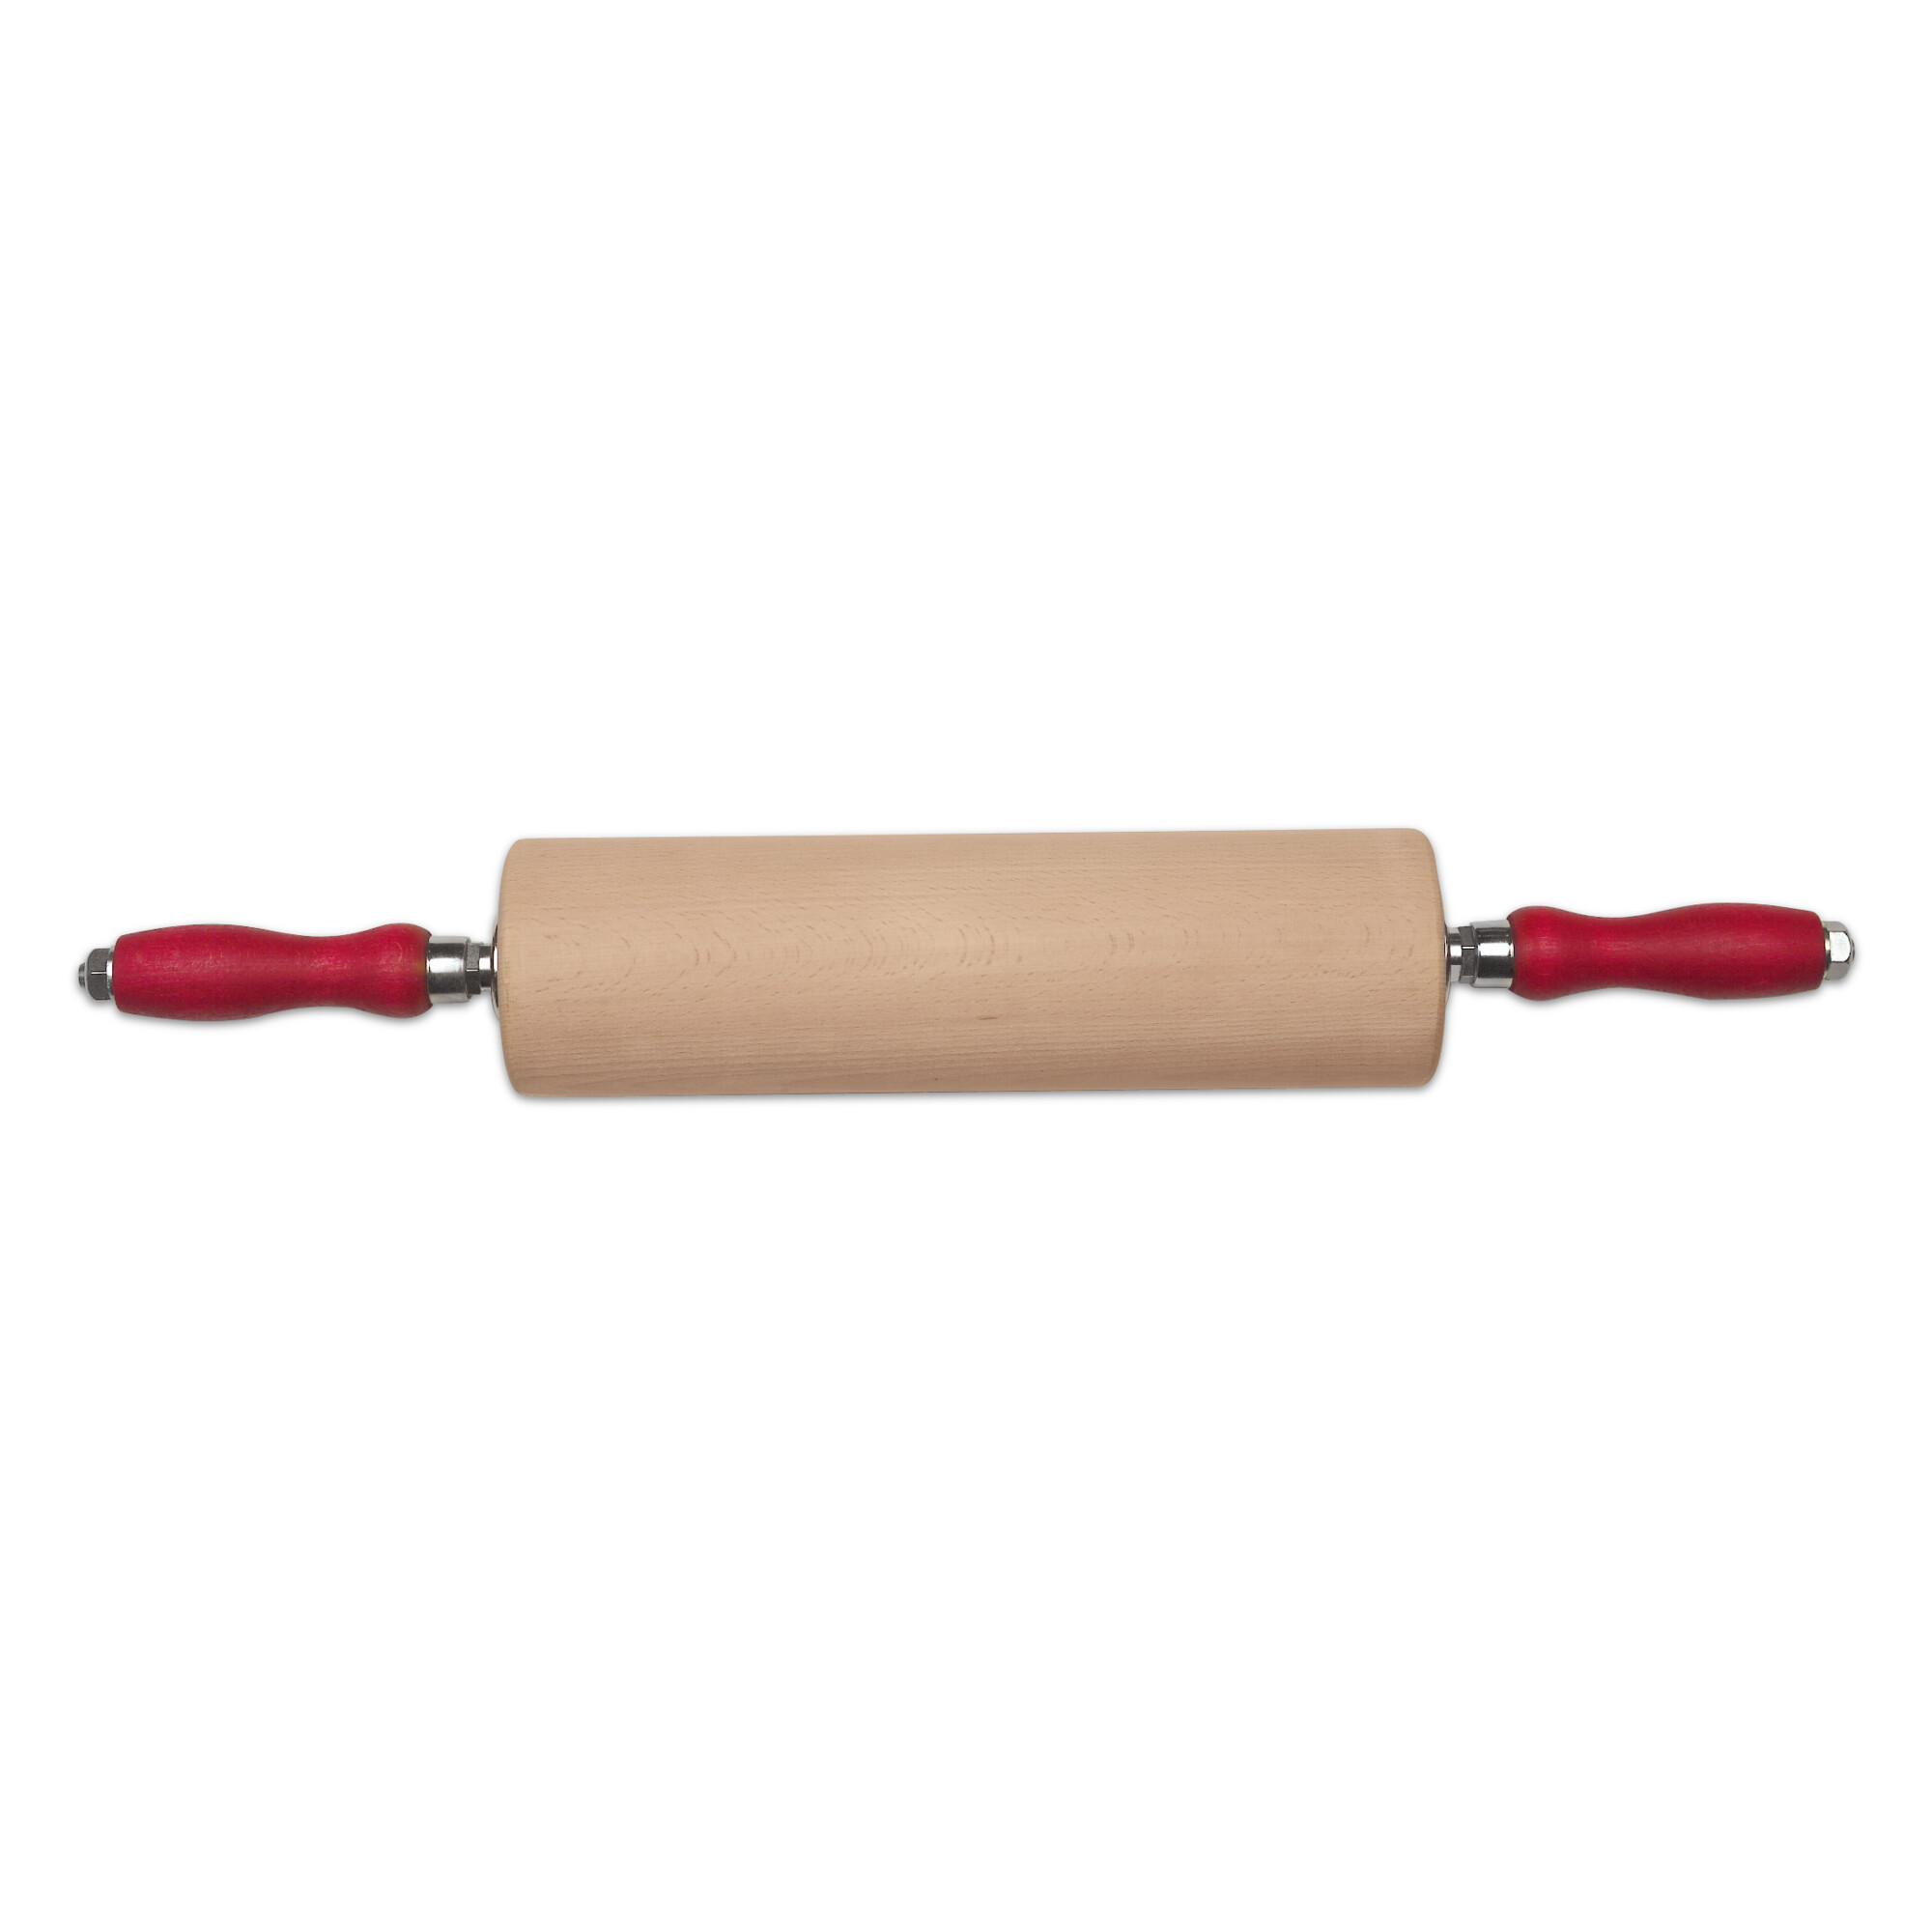 Rolling pin – with ball bearing and iron axis